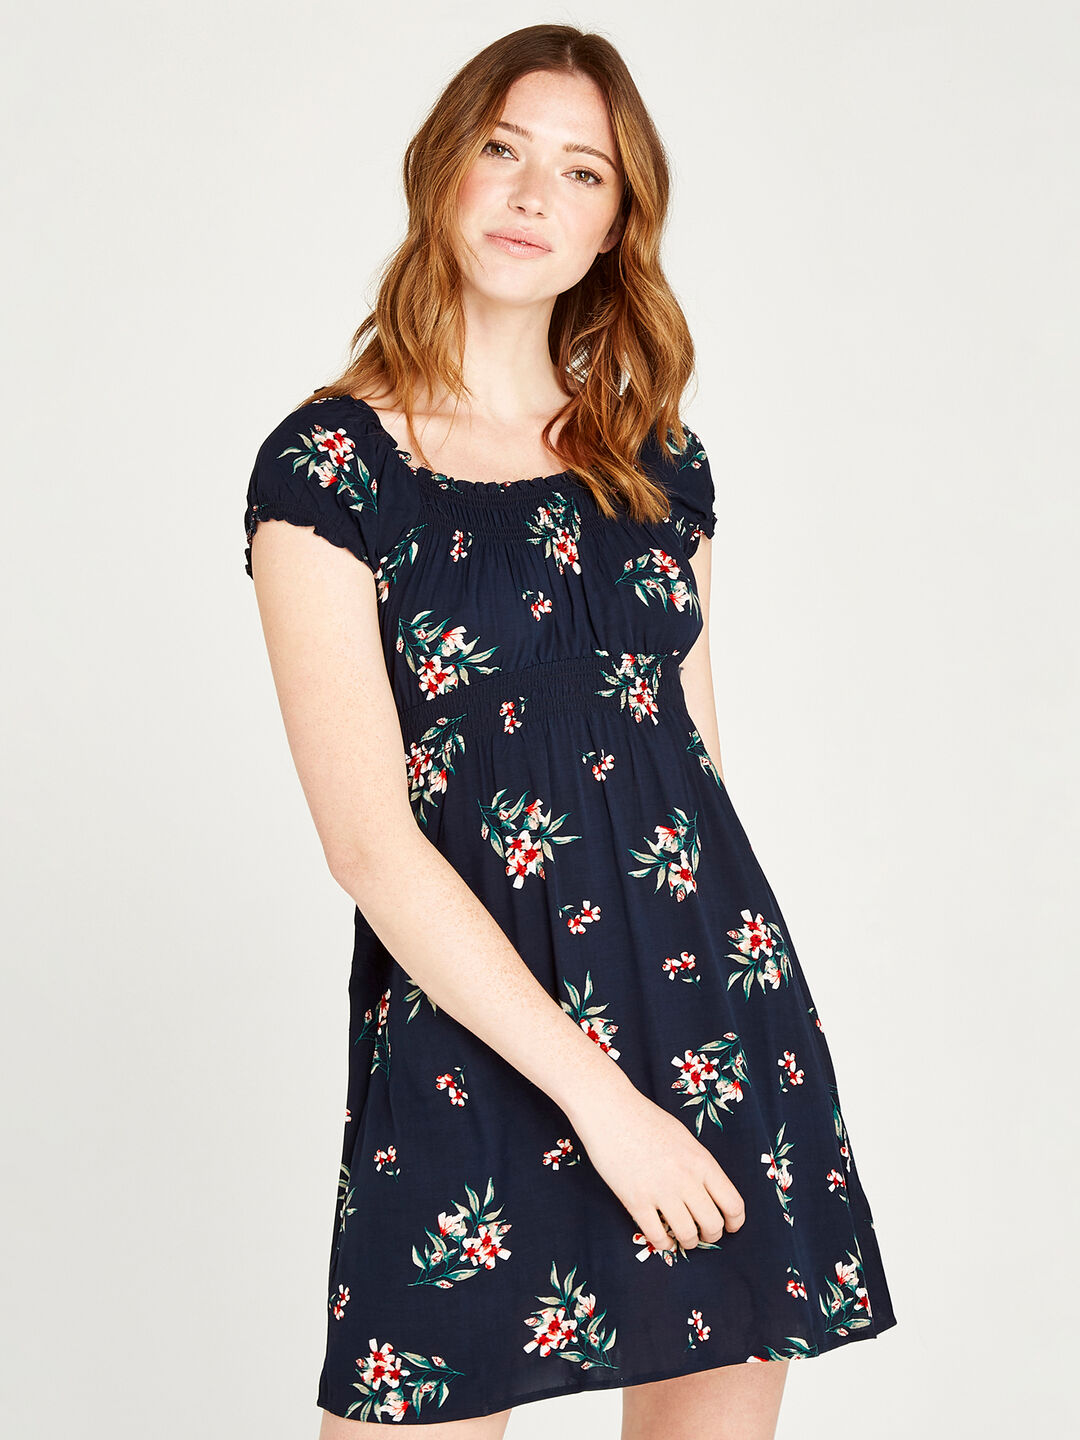 Floral Bunches Milkmaid Dress